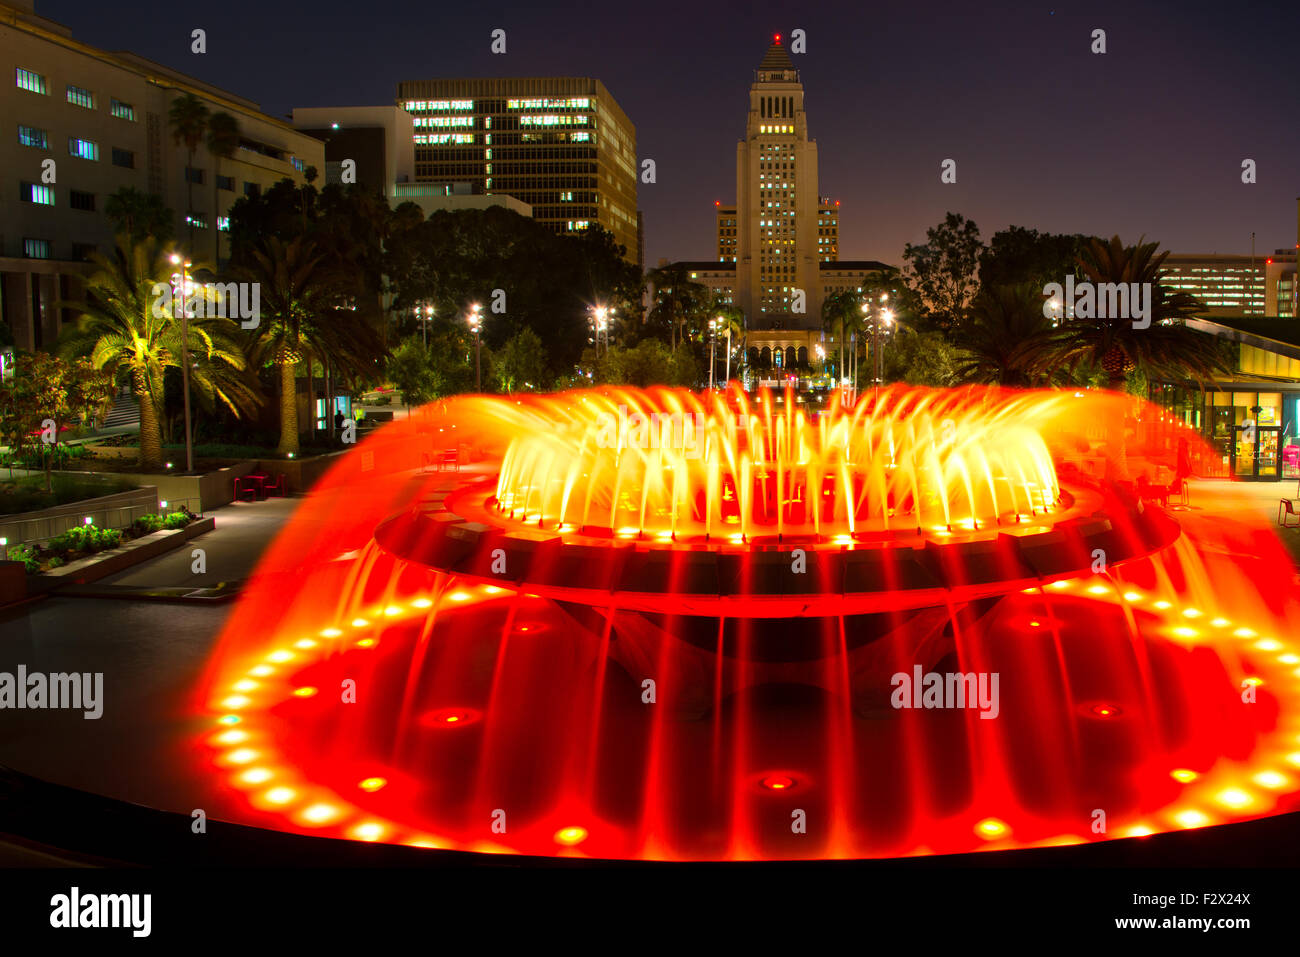 Los Angeles City Hall as seen from the Grand Park at night, Los Angeles, California, USA Stock Photo